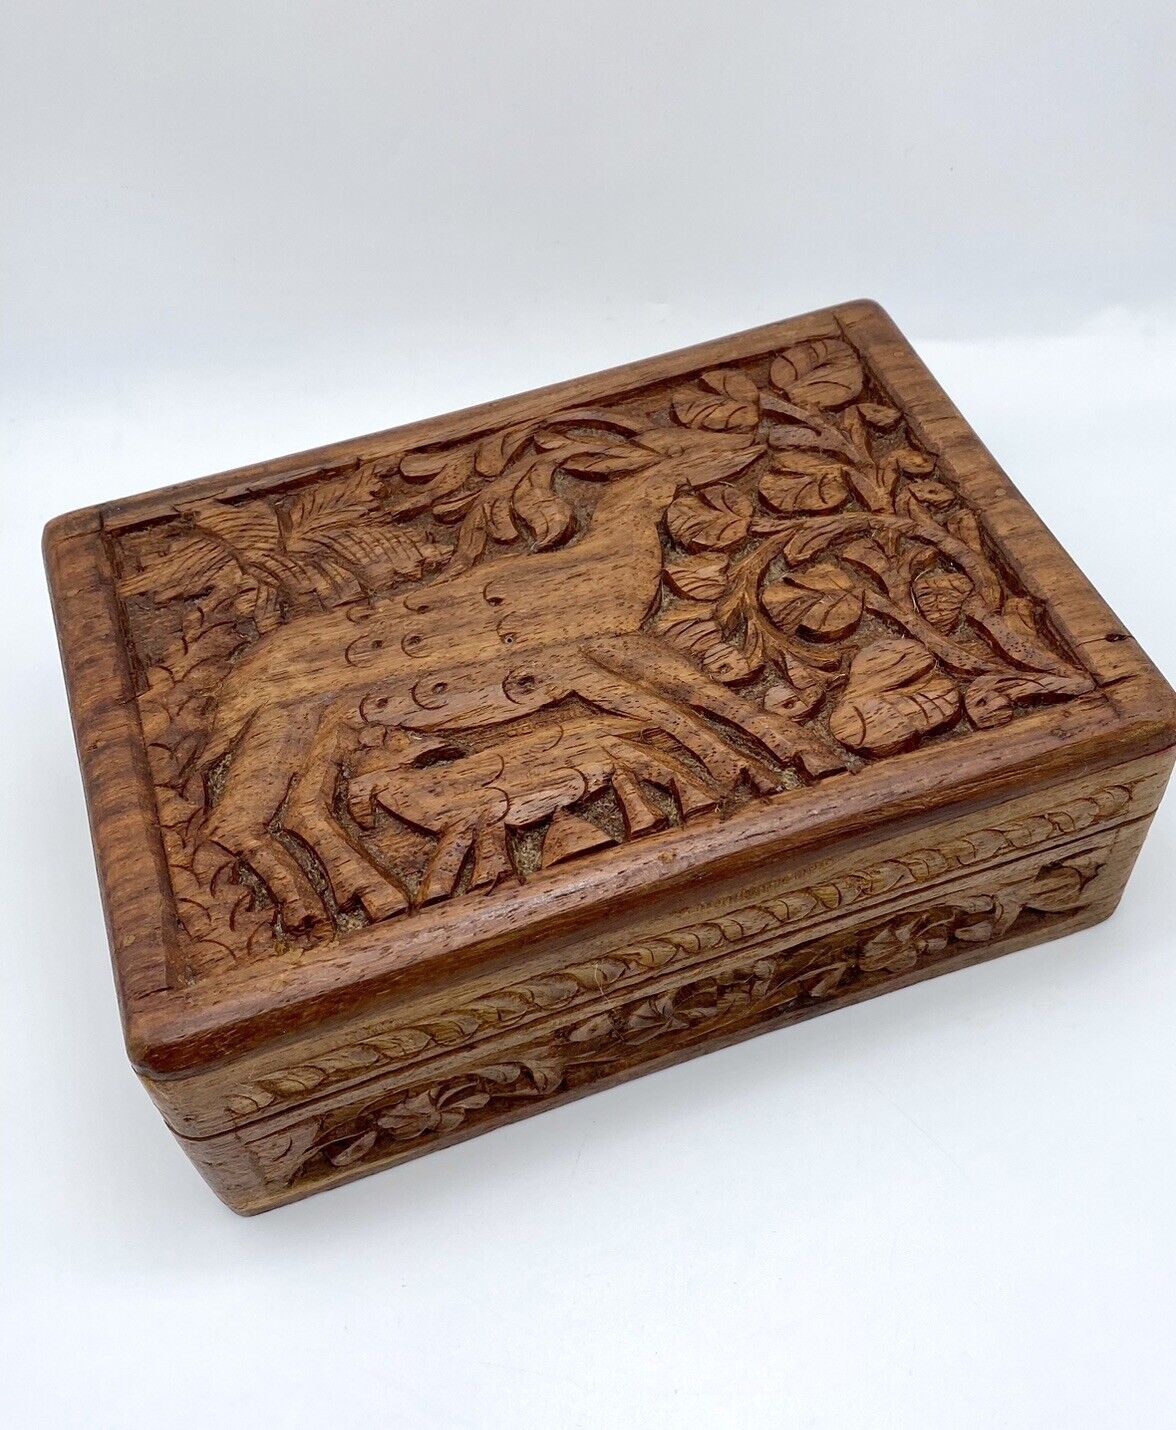 Vintage Hand Carved Wood India Trinket Box Jewelry Apothecary Herbs Spices Tea